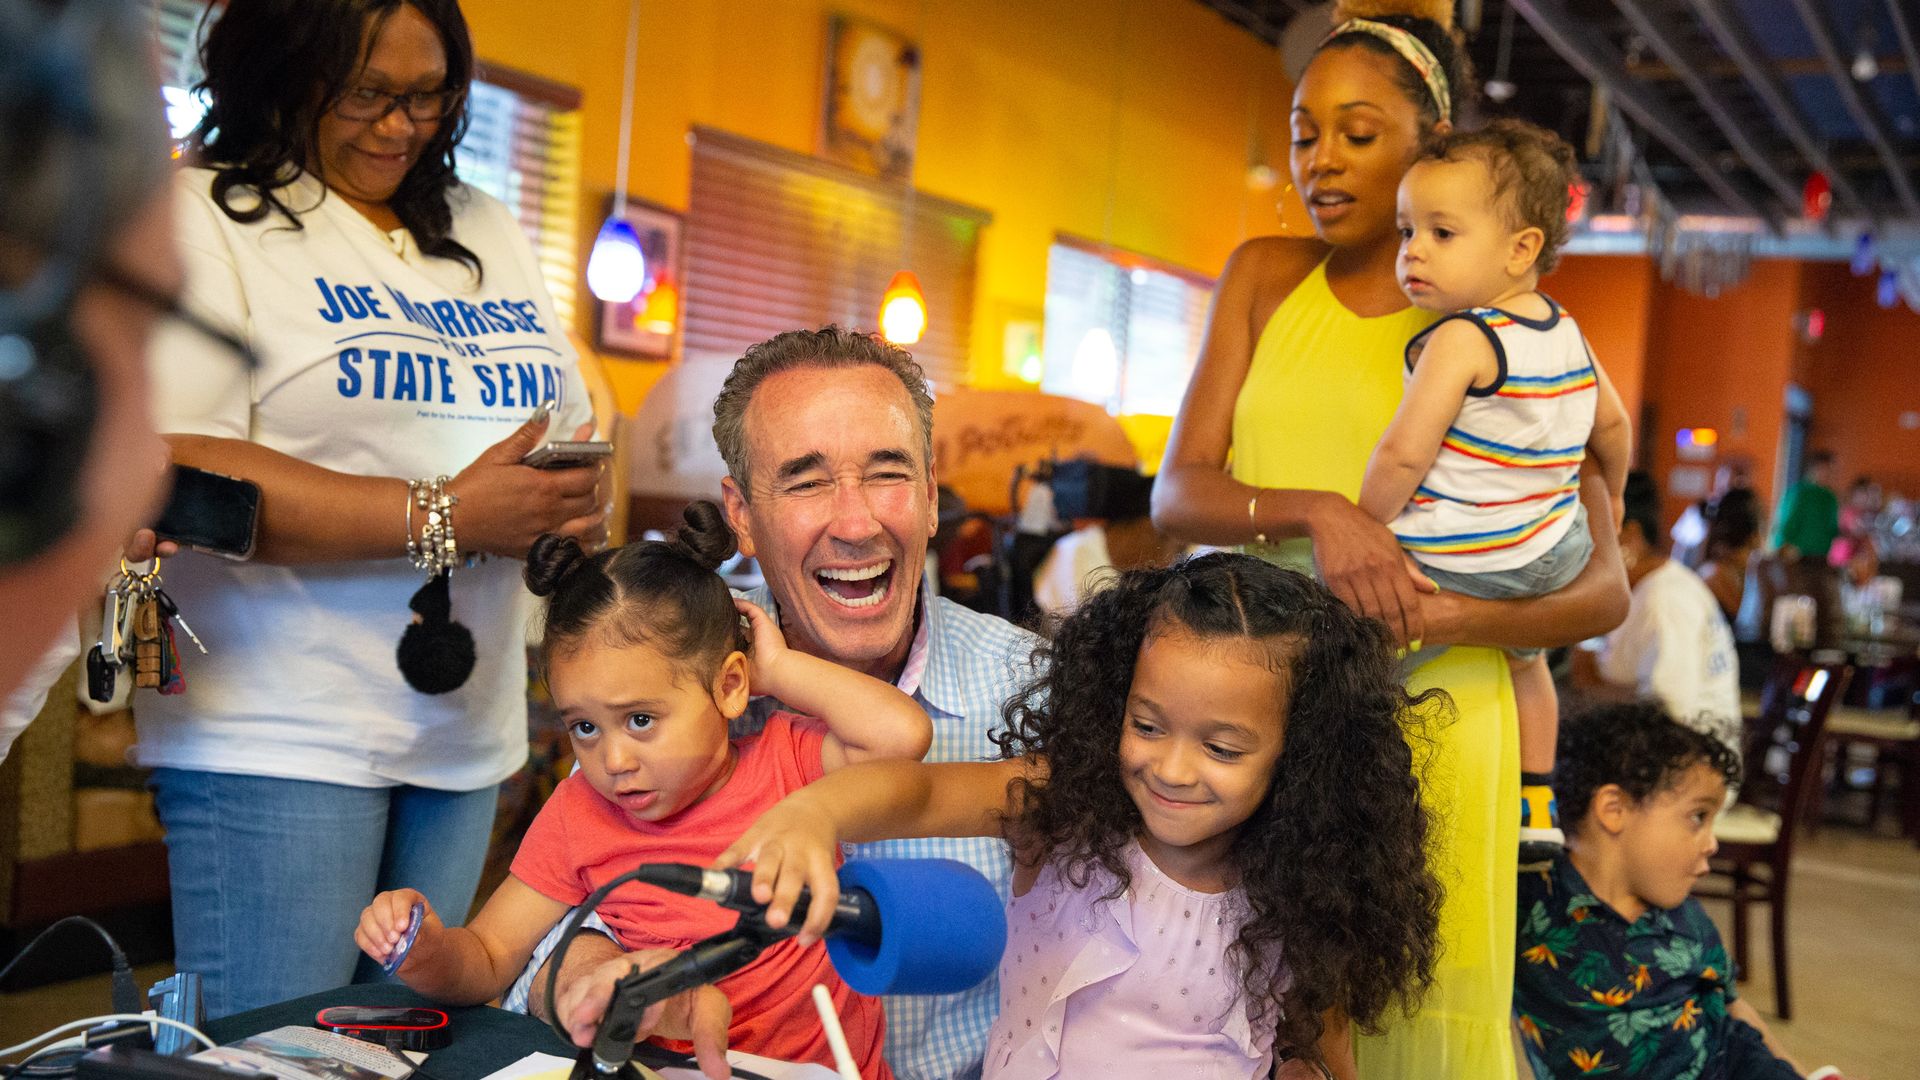 Virginia state senator celebrating with his wife and several of his children after a campaign victory.